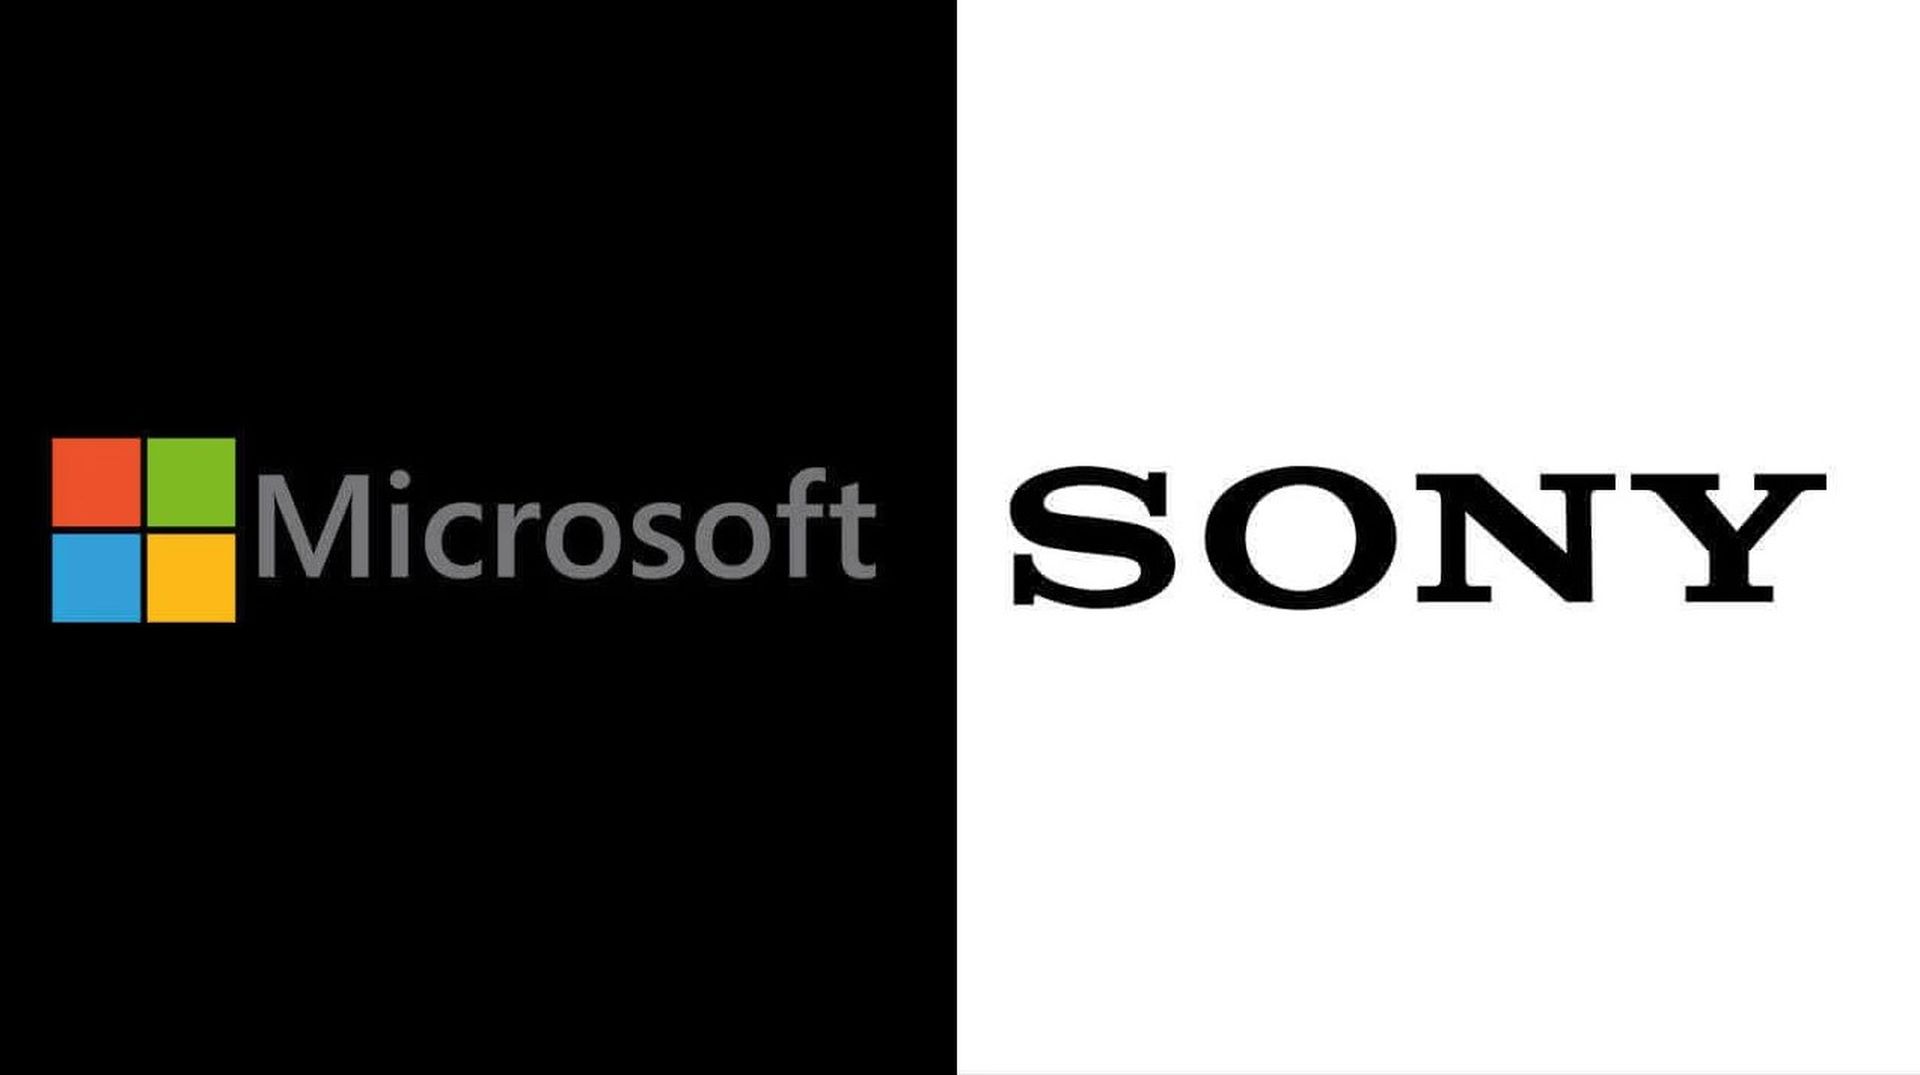 Microsoft accuses Sony of preventing games from coming to Game Pass in an effort to hinder its growth in the gaming industry.